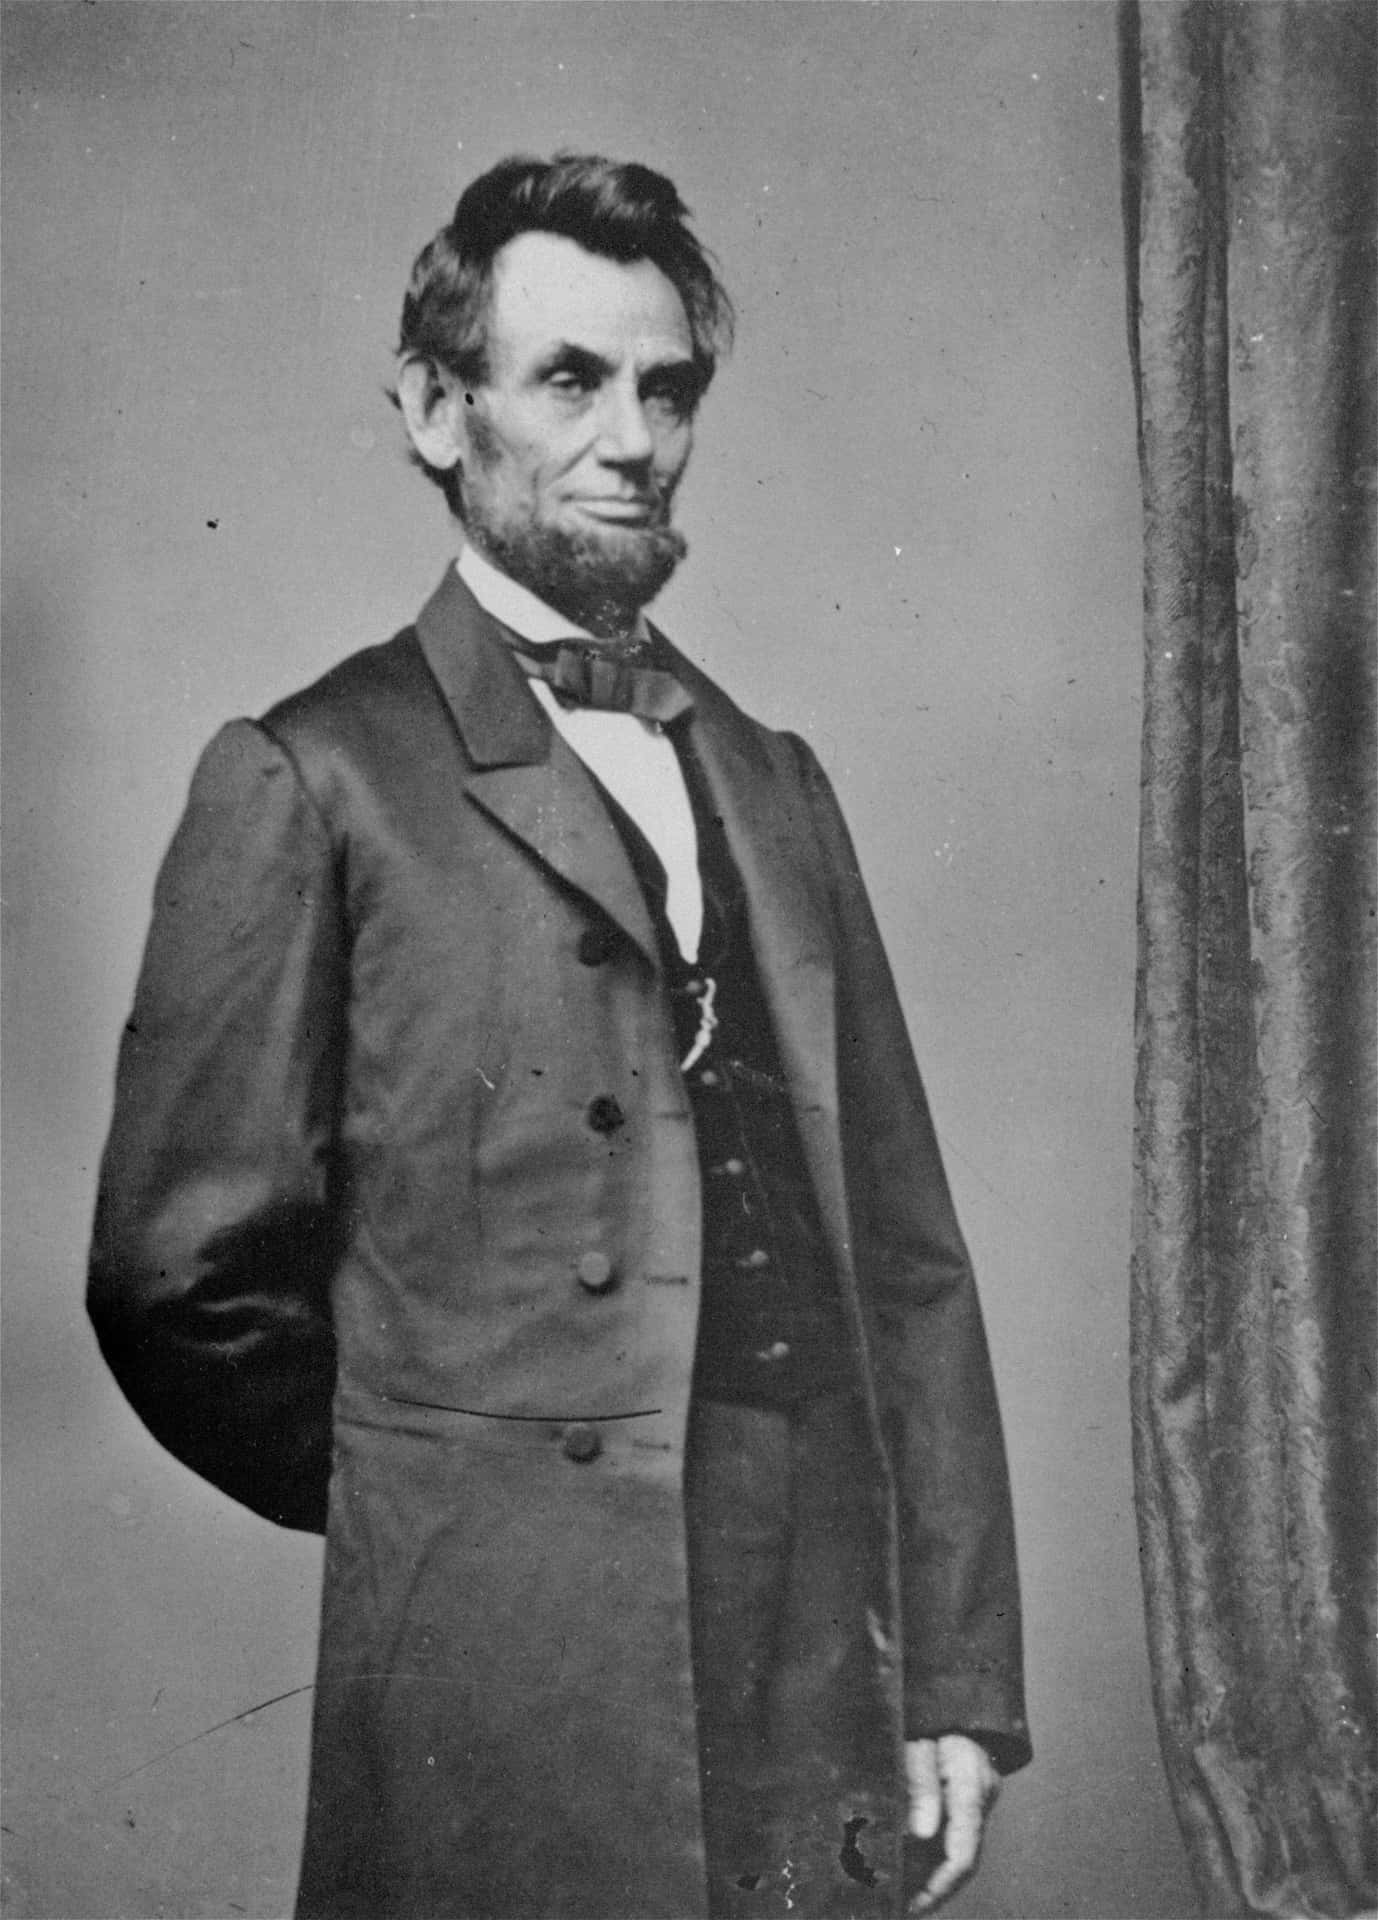 Abraham Lincoln Pictures